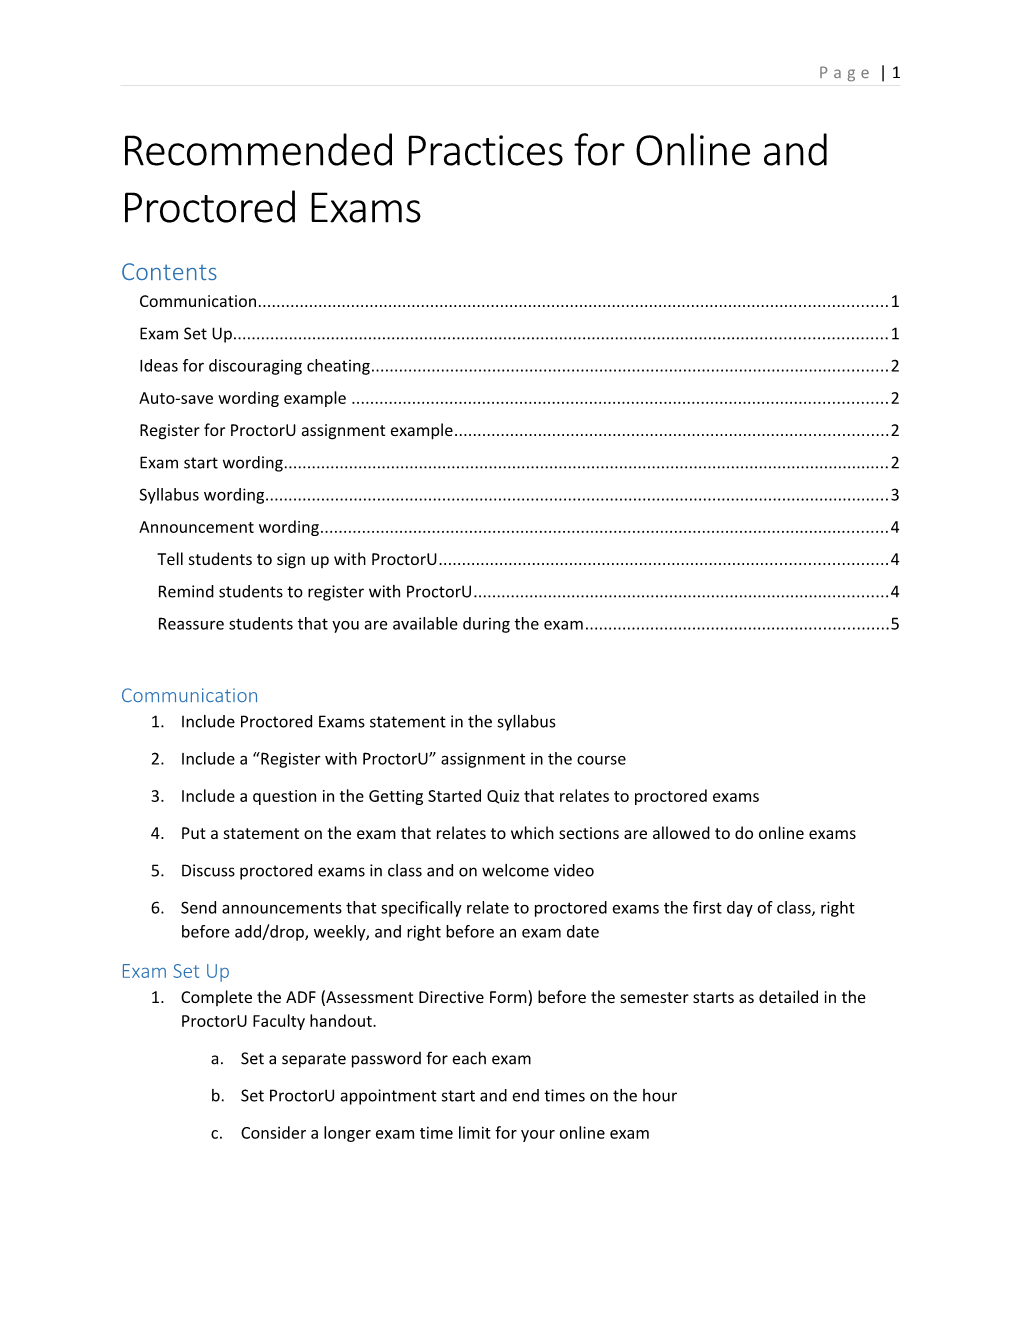 Recommended Practices for Online and Proctored Exams